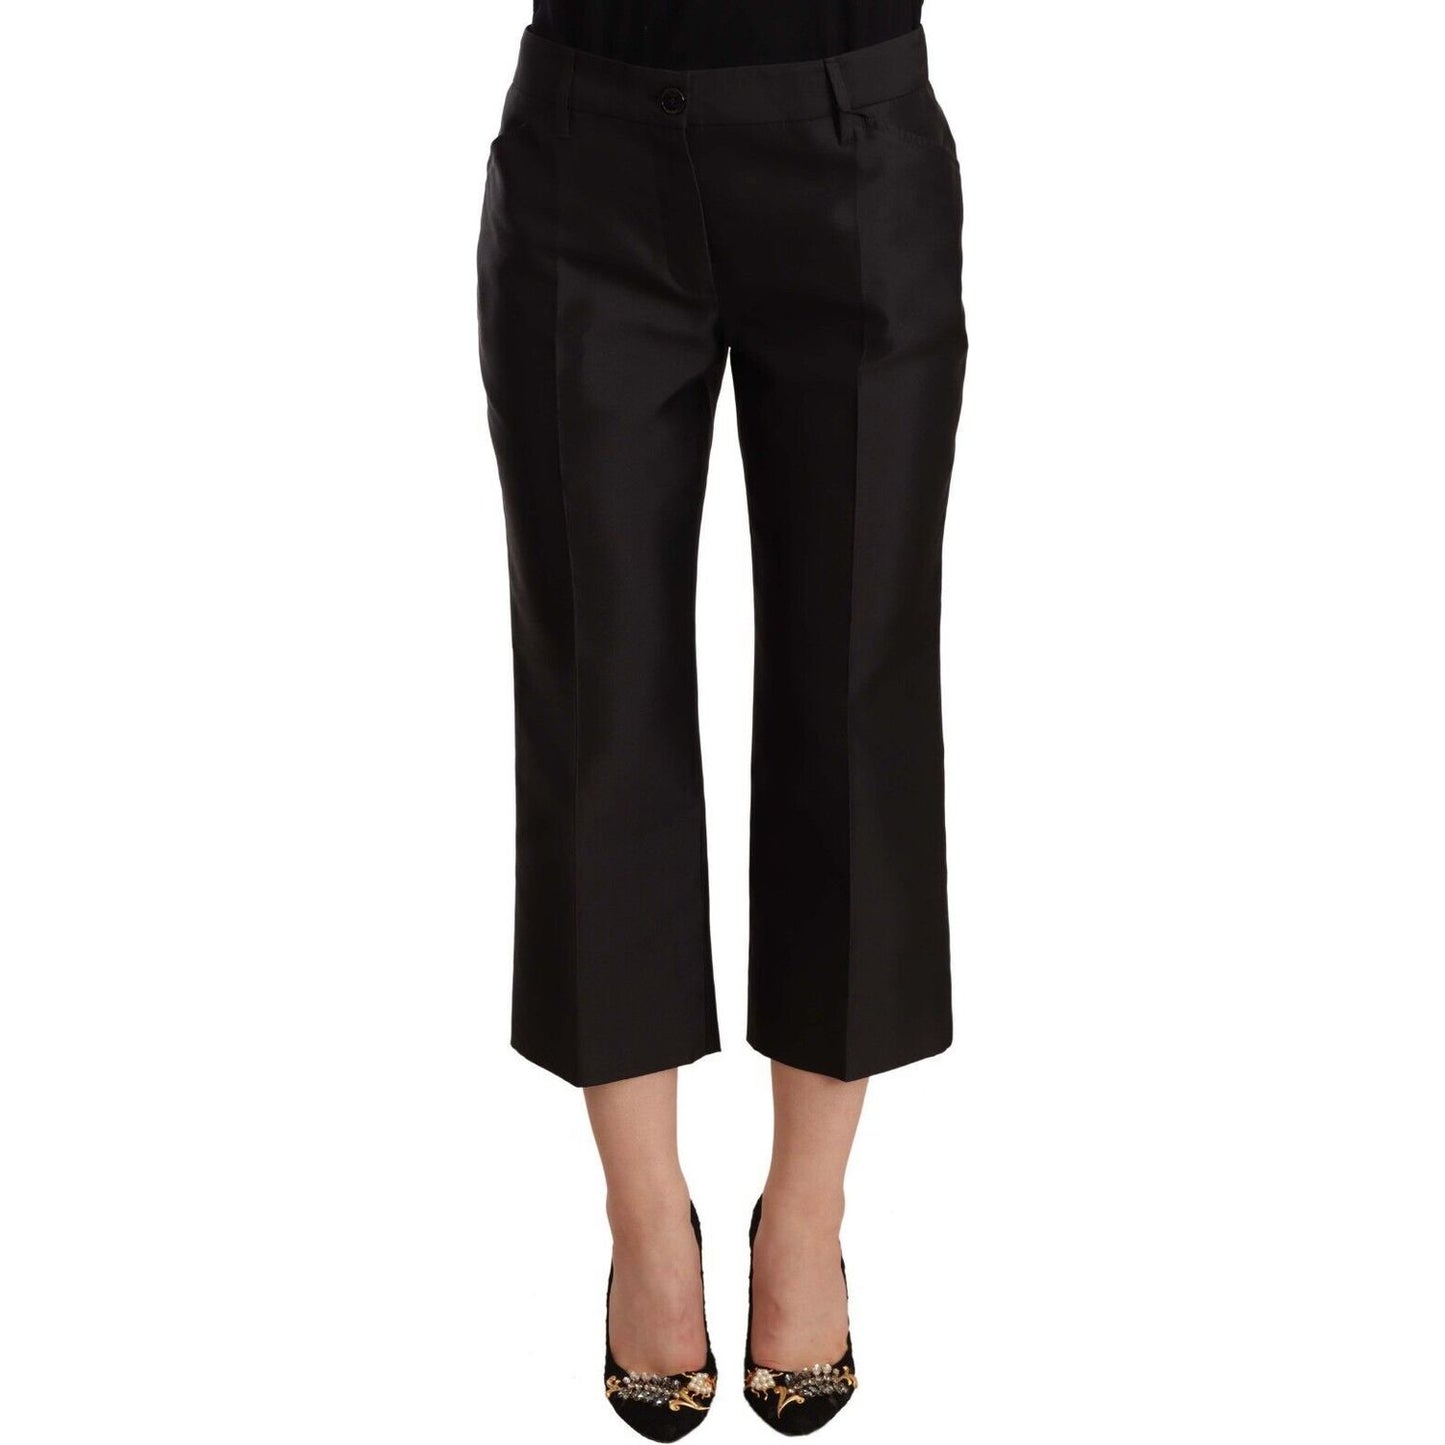 Dolce & Gabbana Chic Silk Cropped Trousers in Timeless Black black-100-silk-flared-cropped-pants